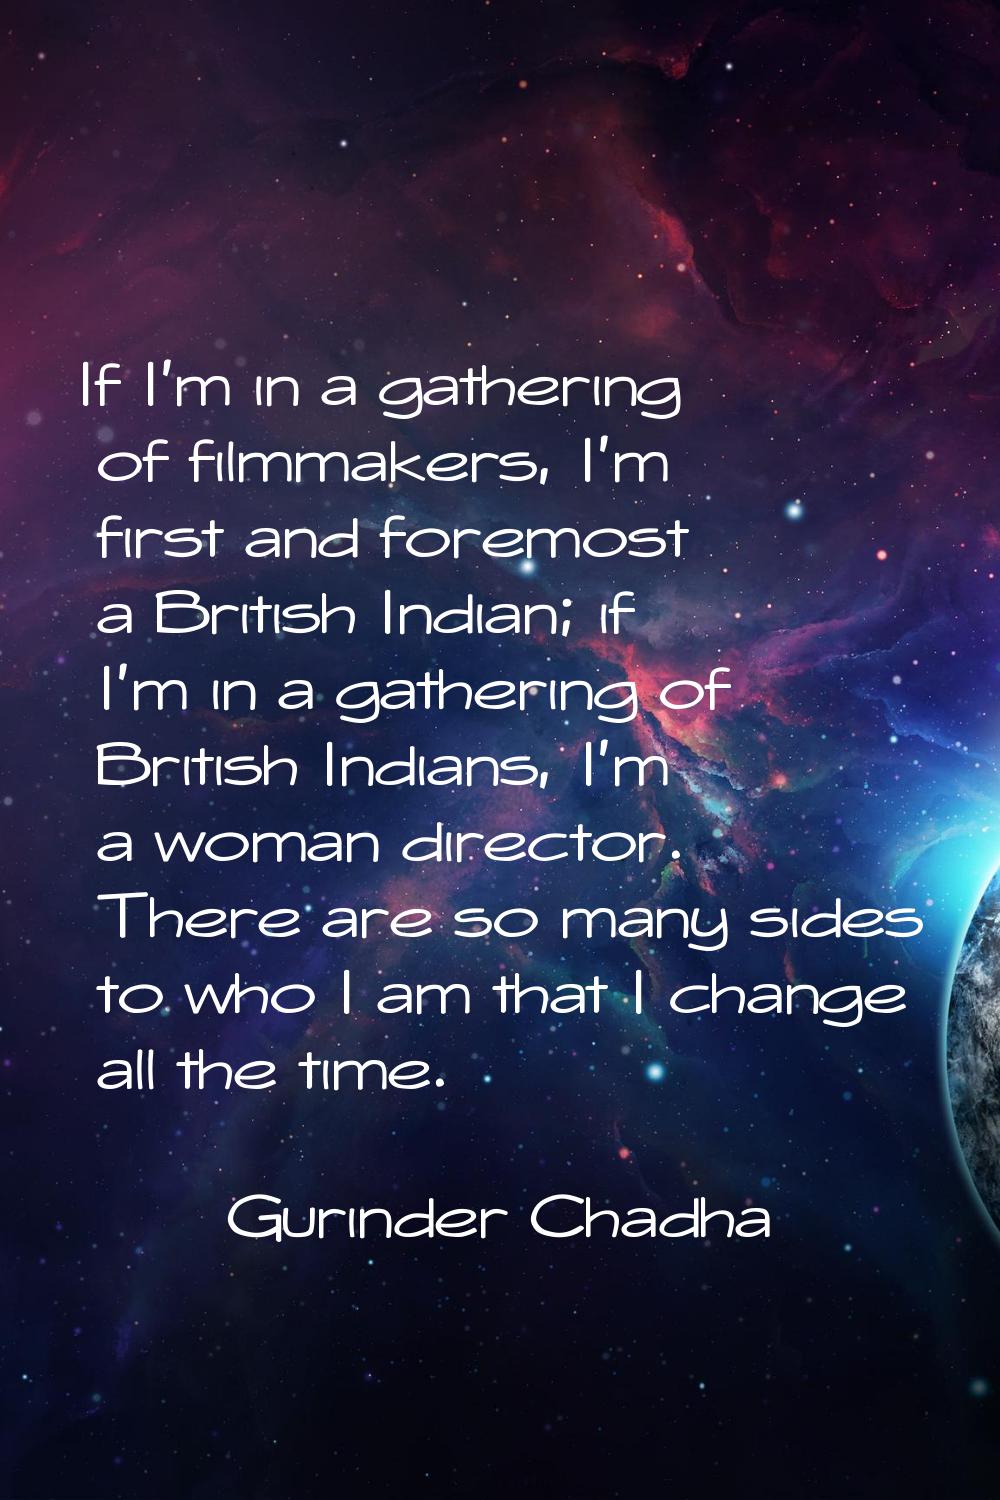 If I'm in a gathering of filmmakers, I'm first and foremost a British Indian; if I'm in a gathering